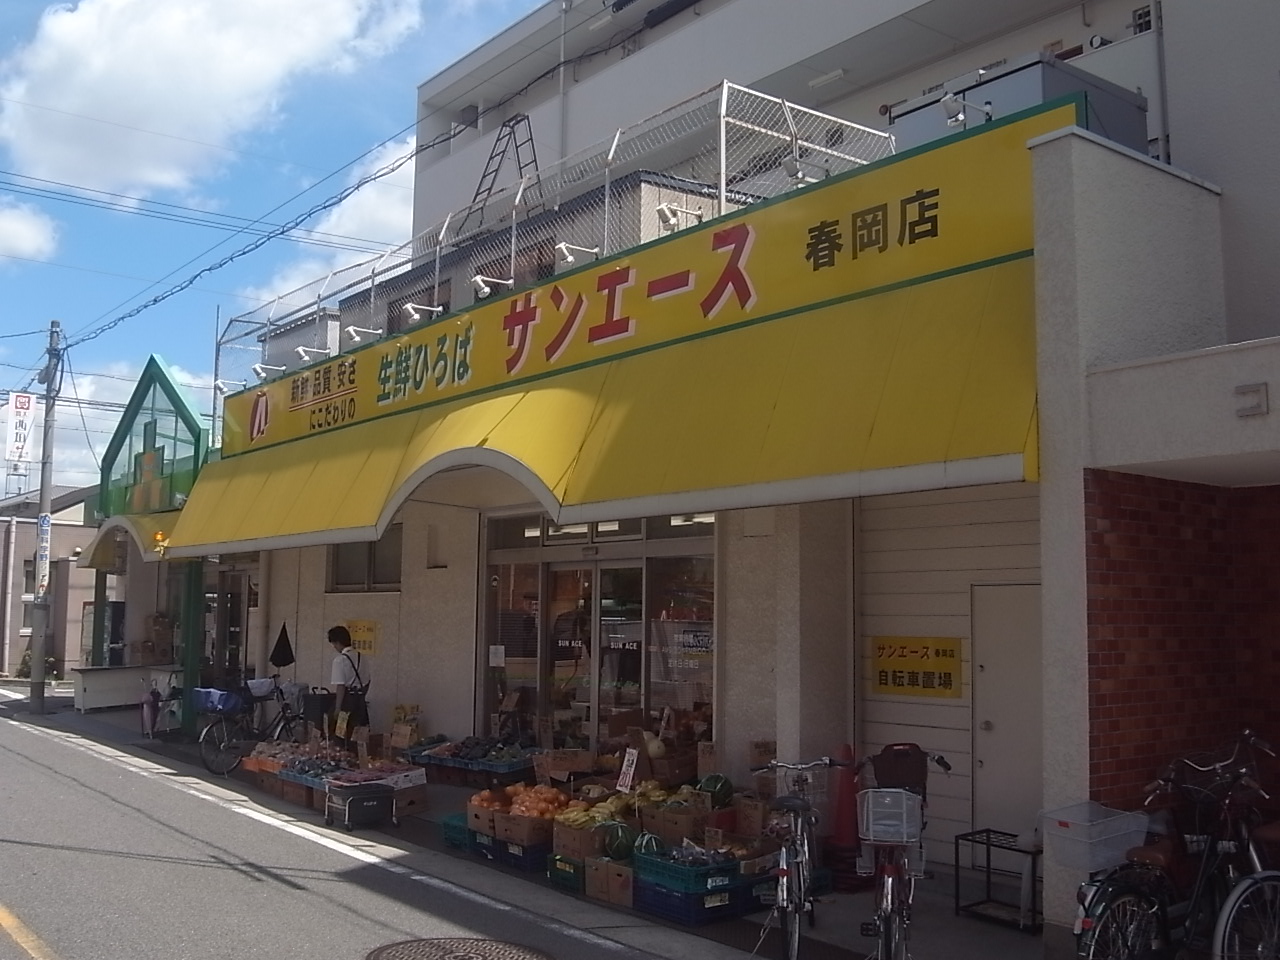 Supermarket. SAN ACE Haruoka store up to (super) 635m